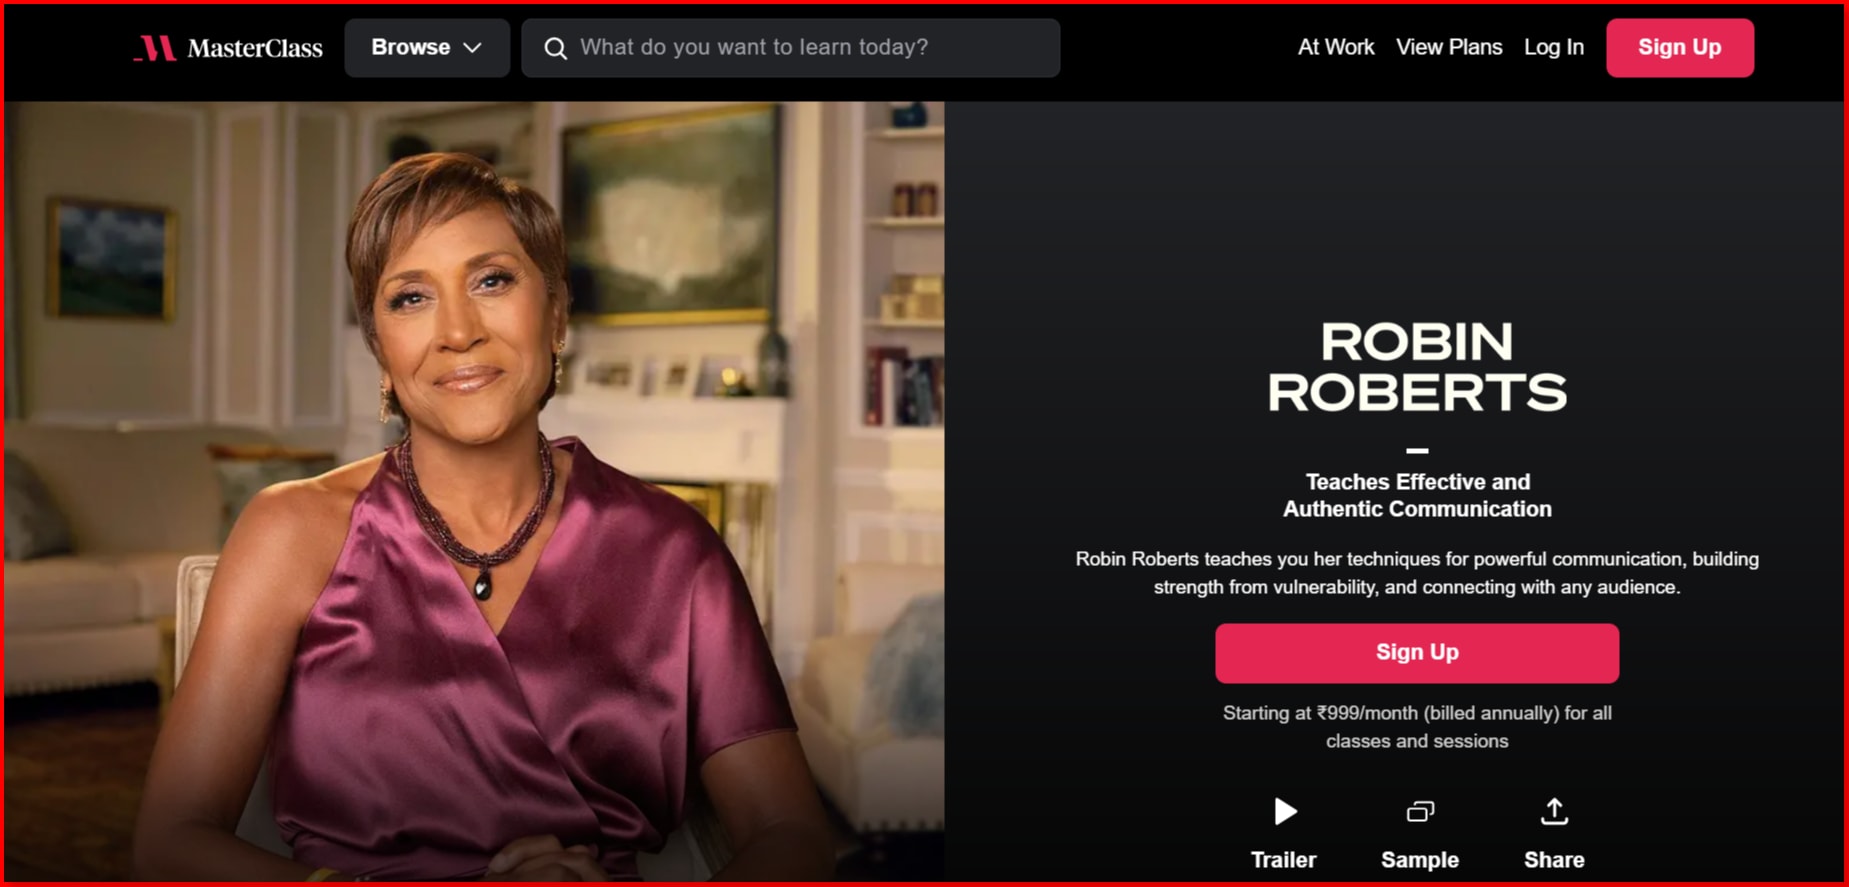 Robin Roberts Masterclass Review - Overview